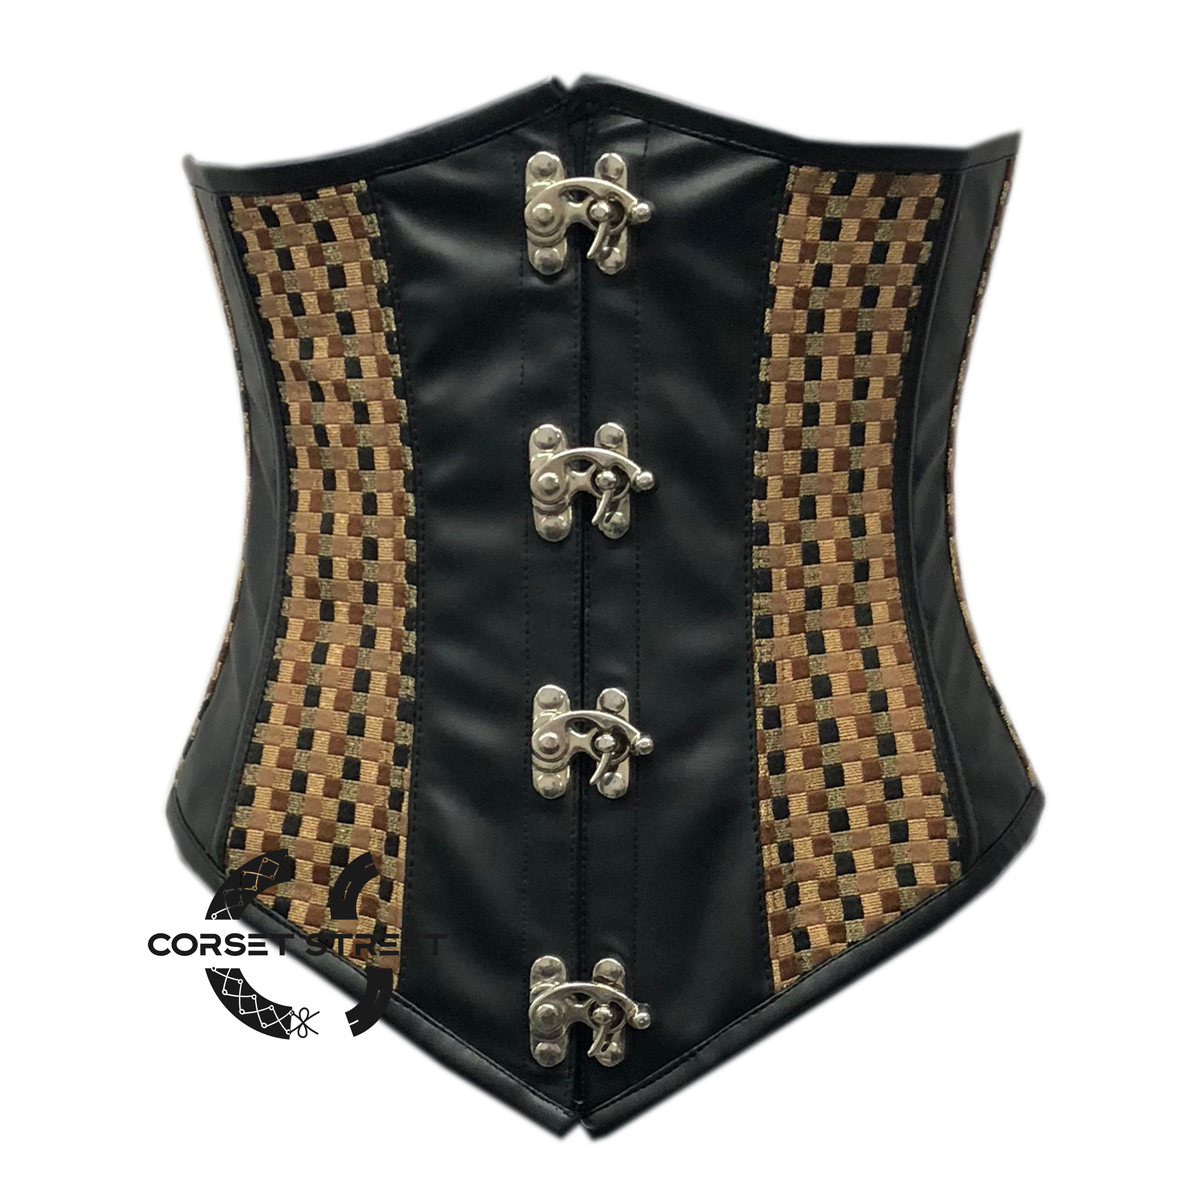       Black Faux Leather With Brown Jute Steampunk Underbust Gothic Costume – CorsetStreet